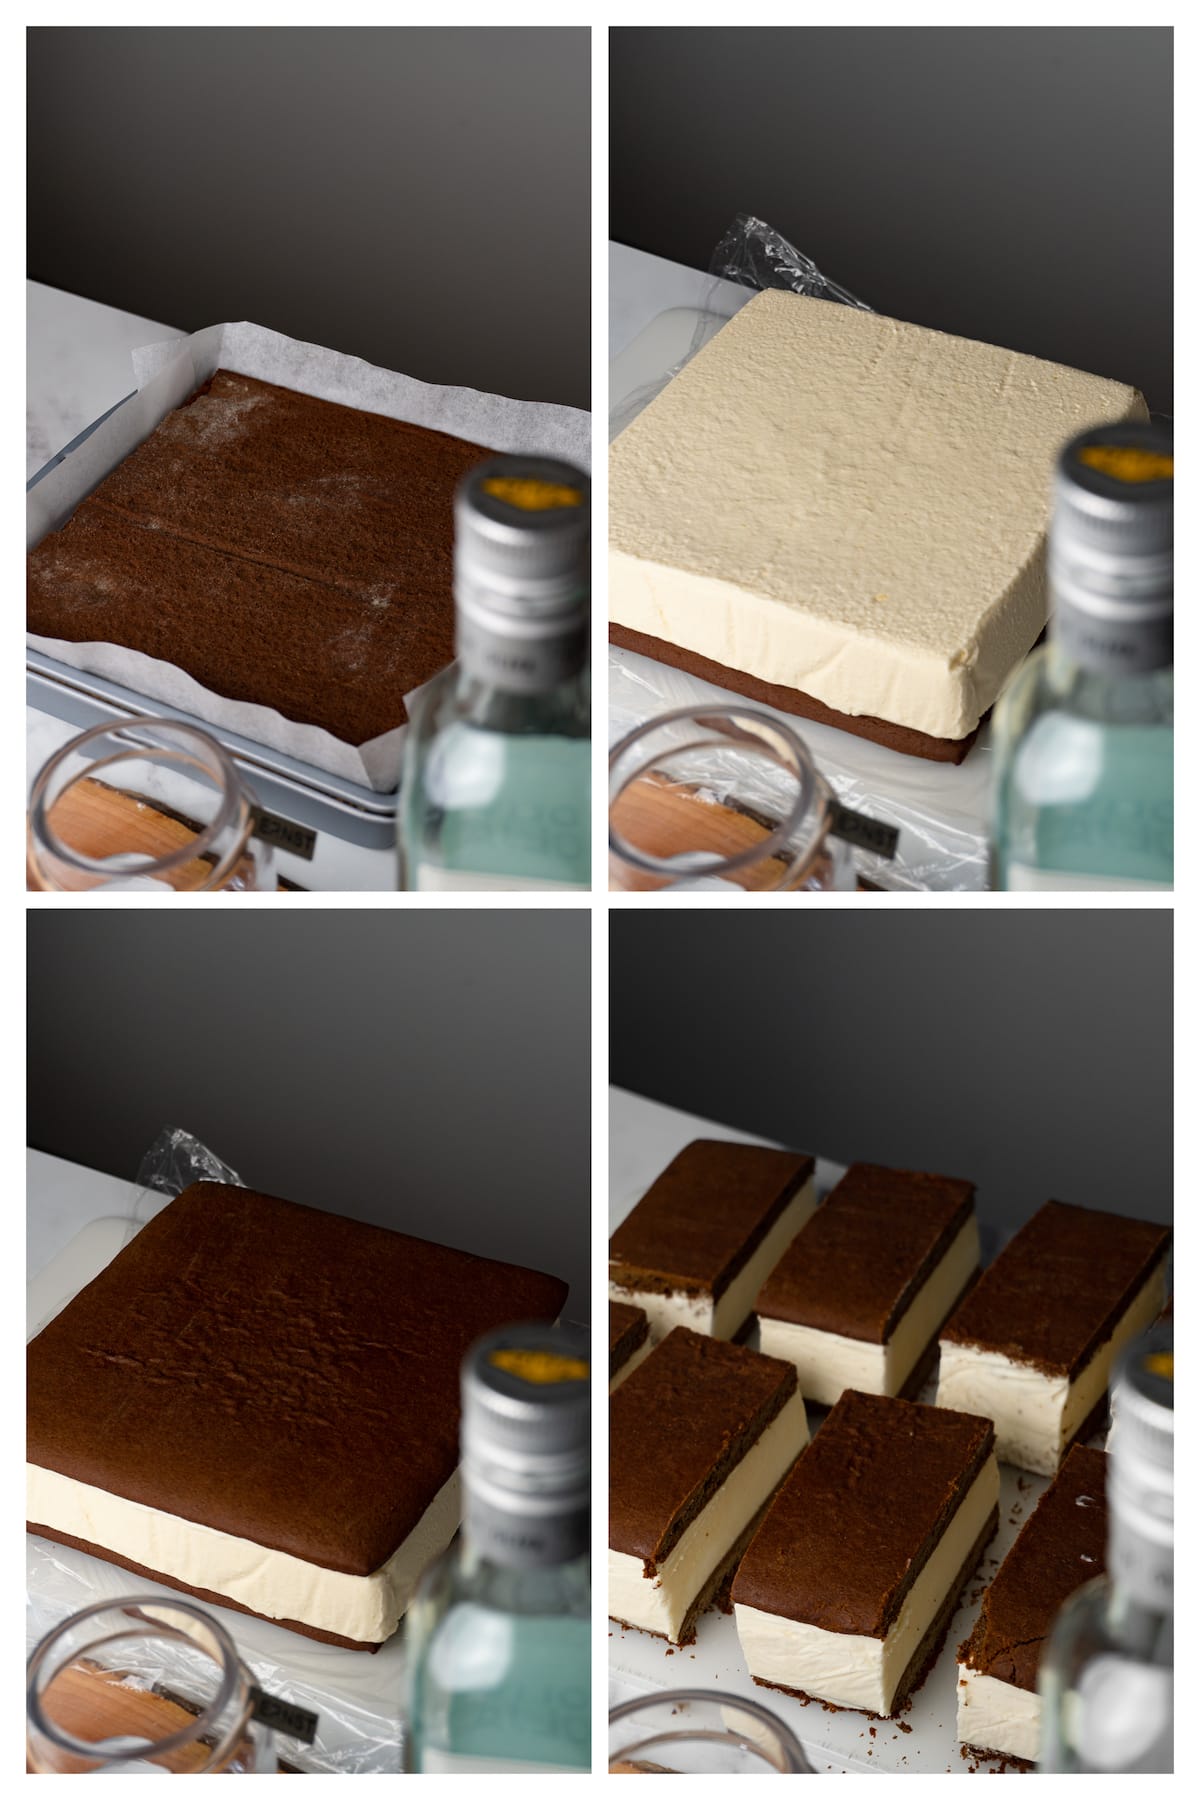 The collage image shows four steps to assemble ice cream sandwiches.